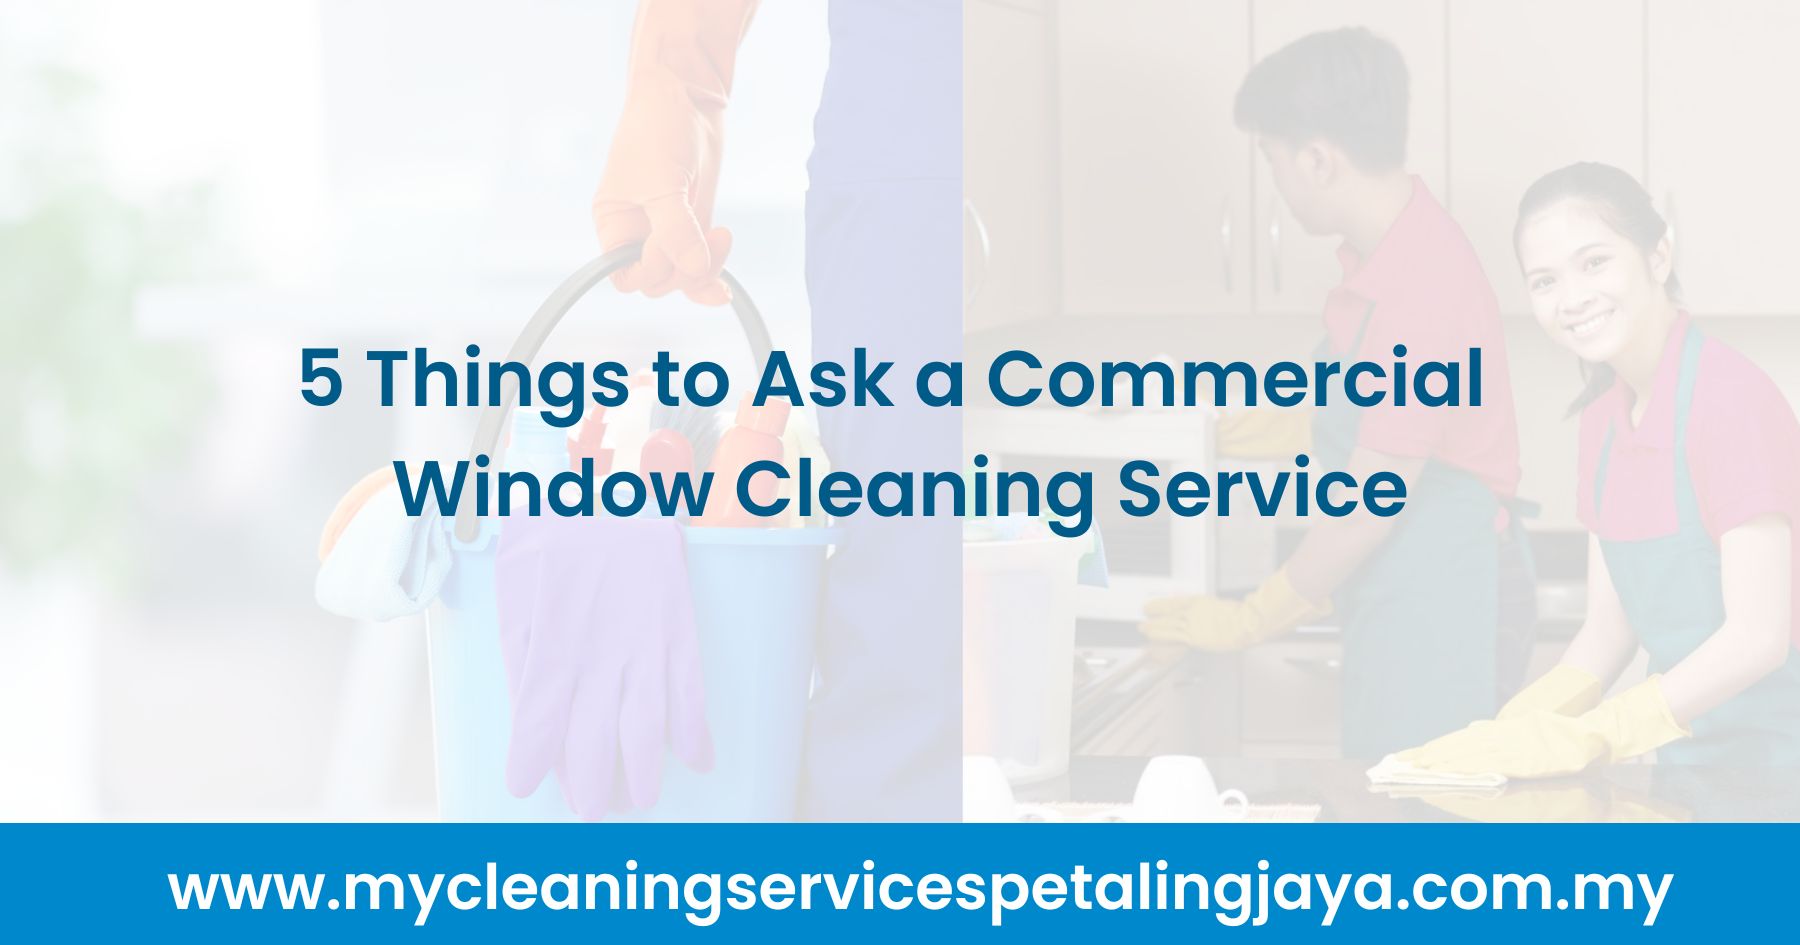 5 Things to Ask a Commercial Window Cleaning Service